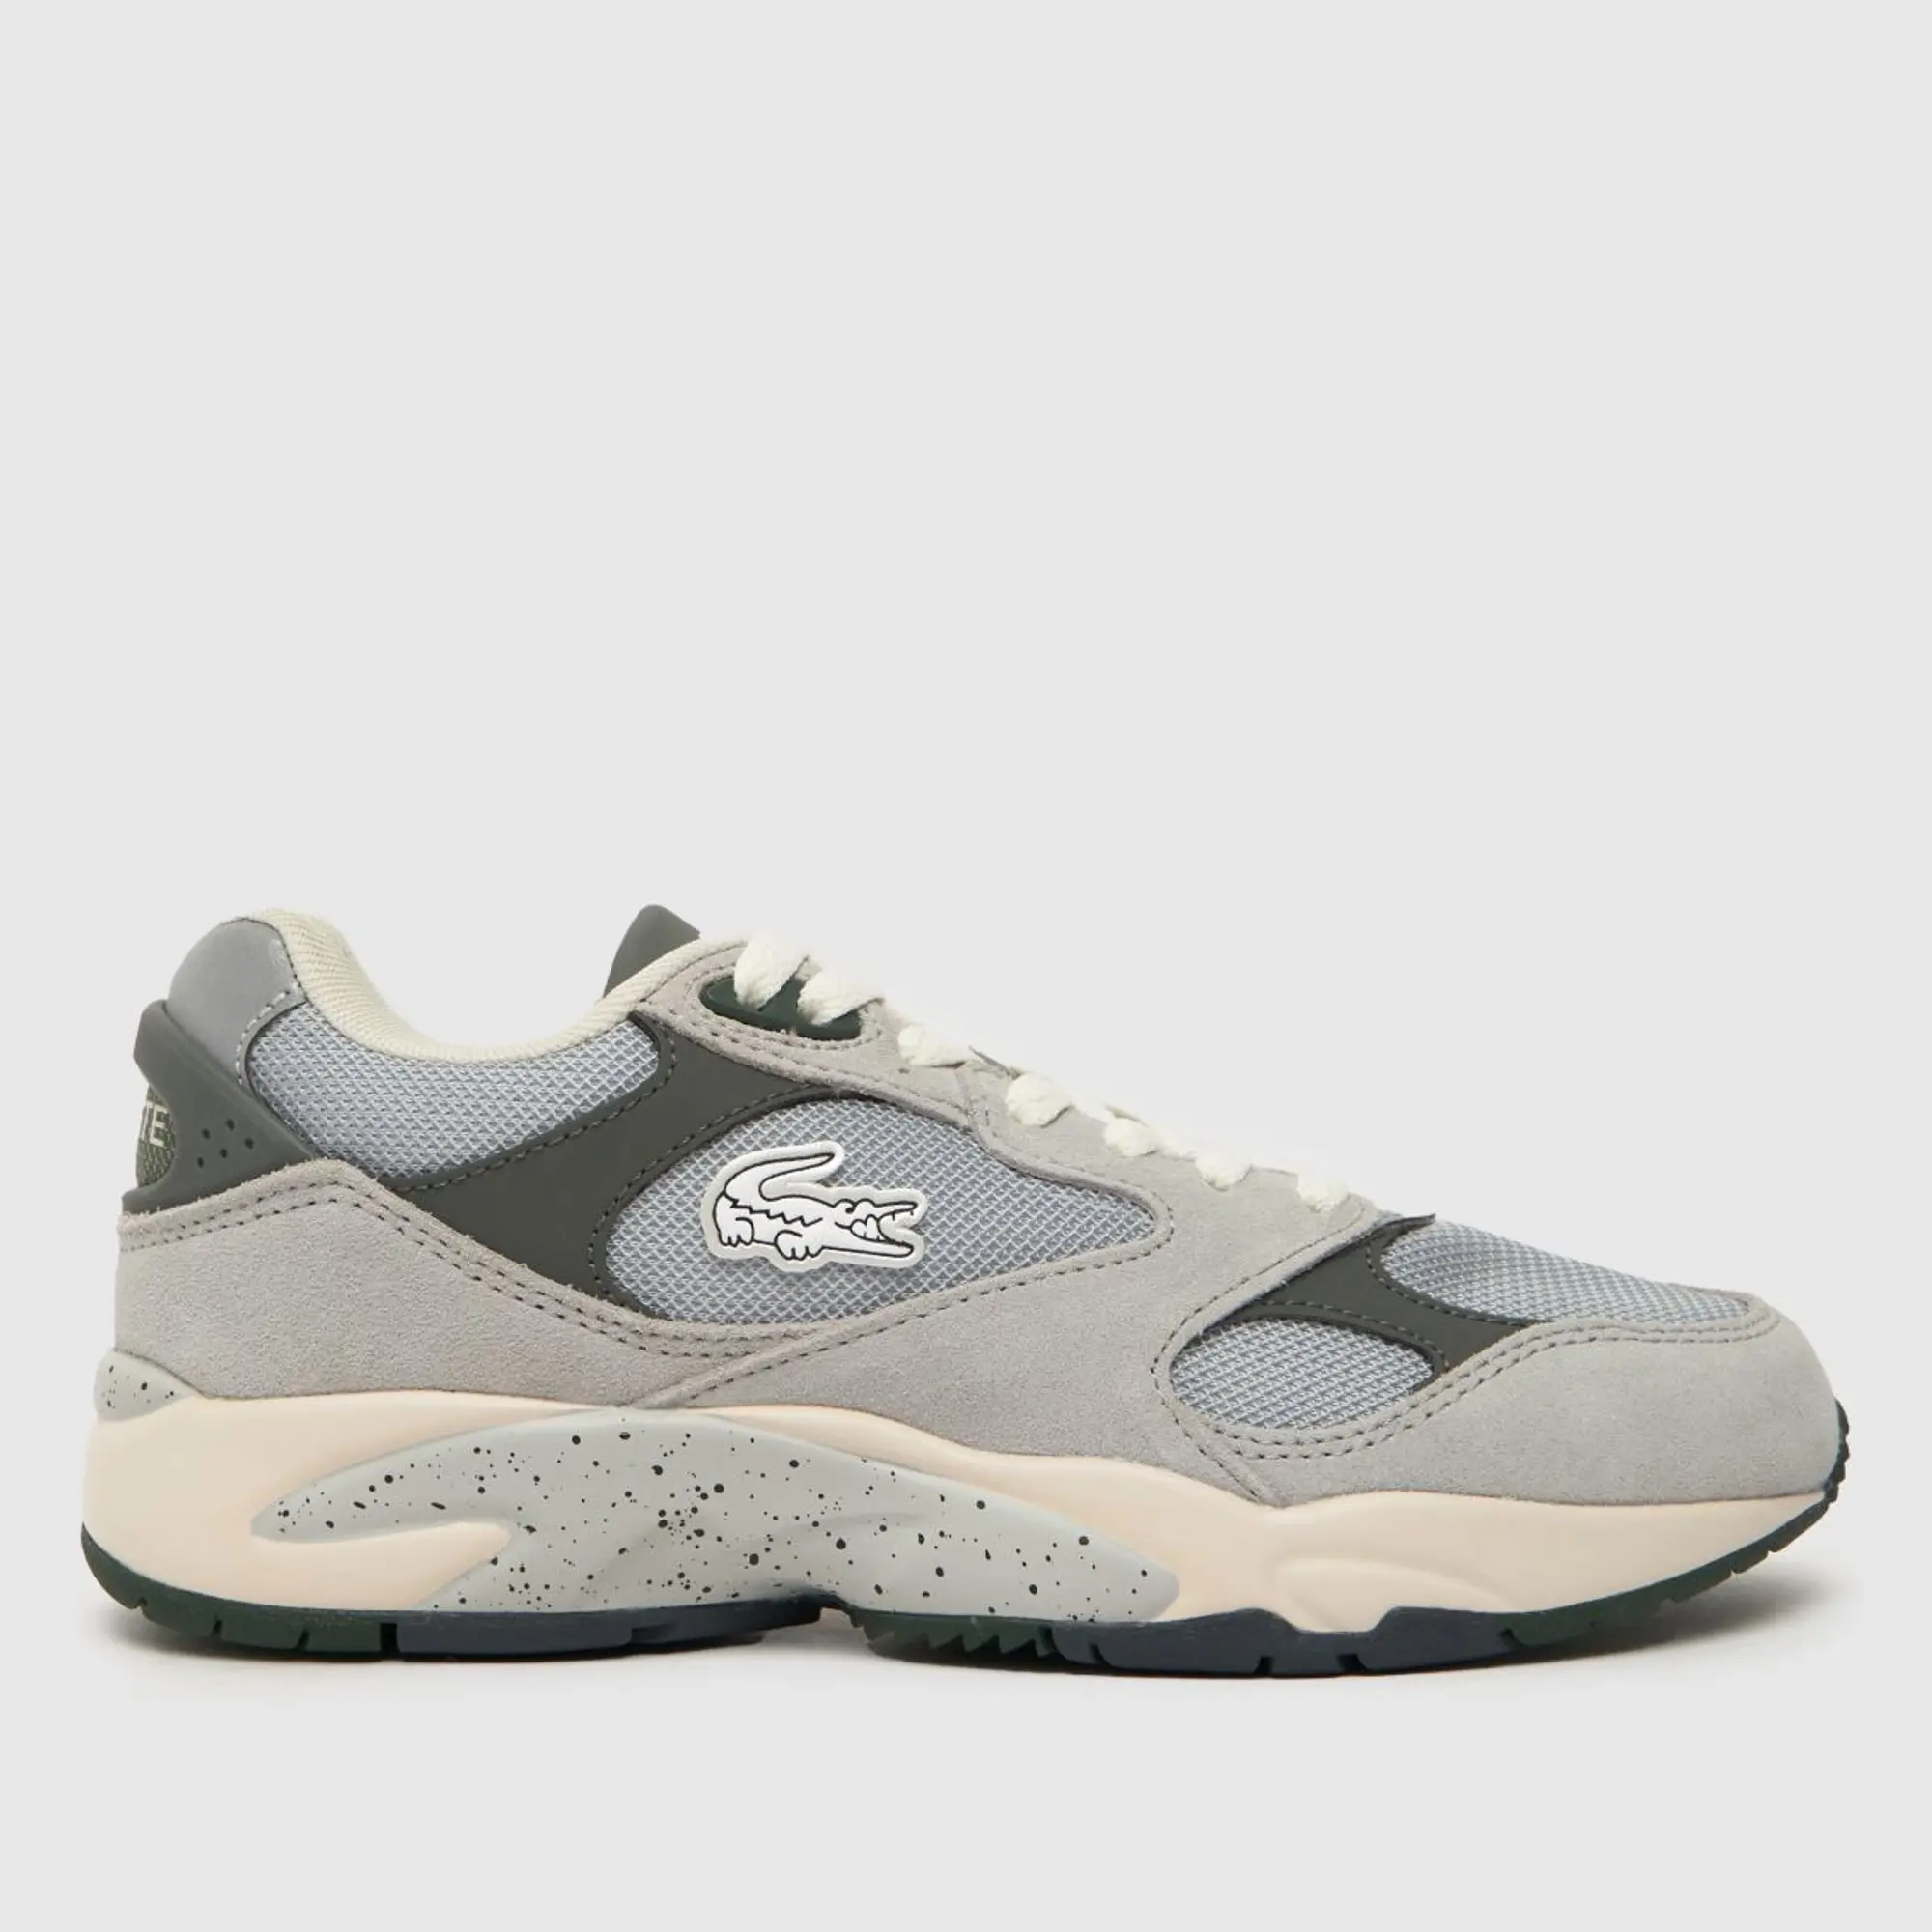 Lacoste storm 96 vintage trainers in light grey